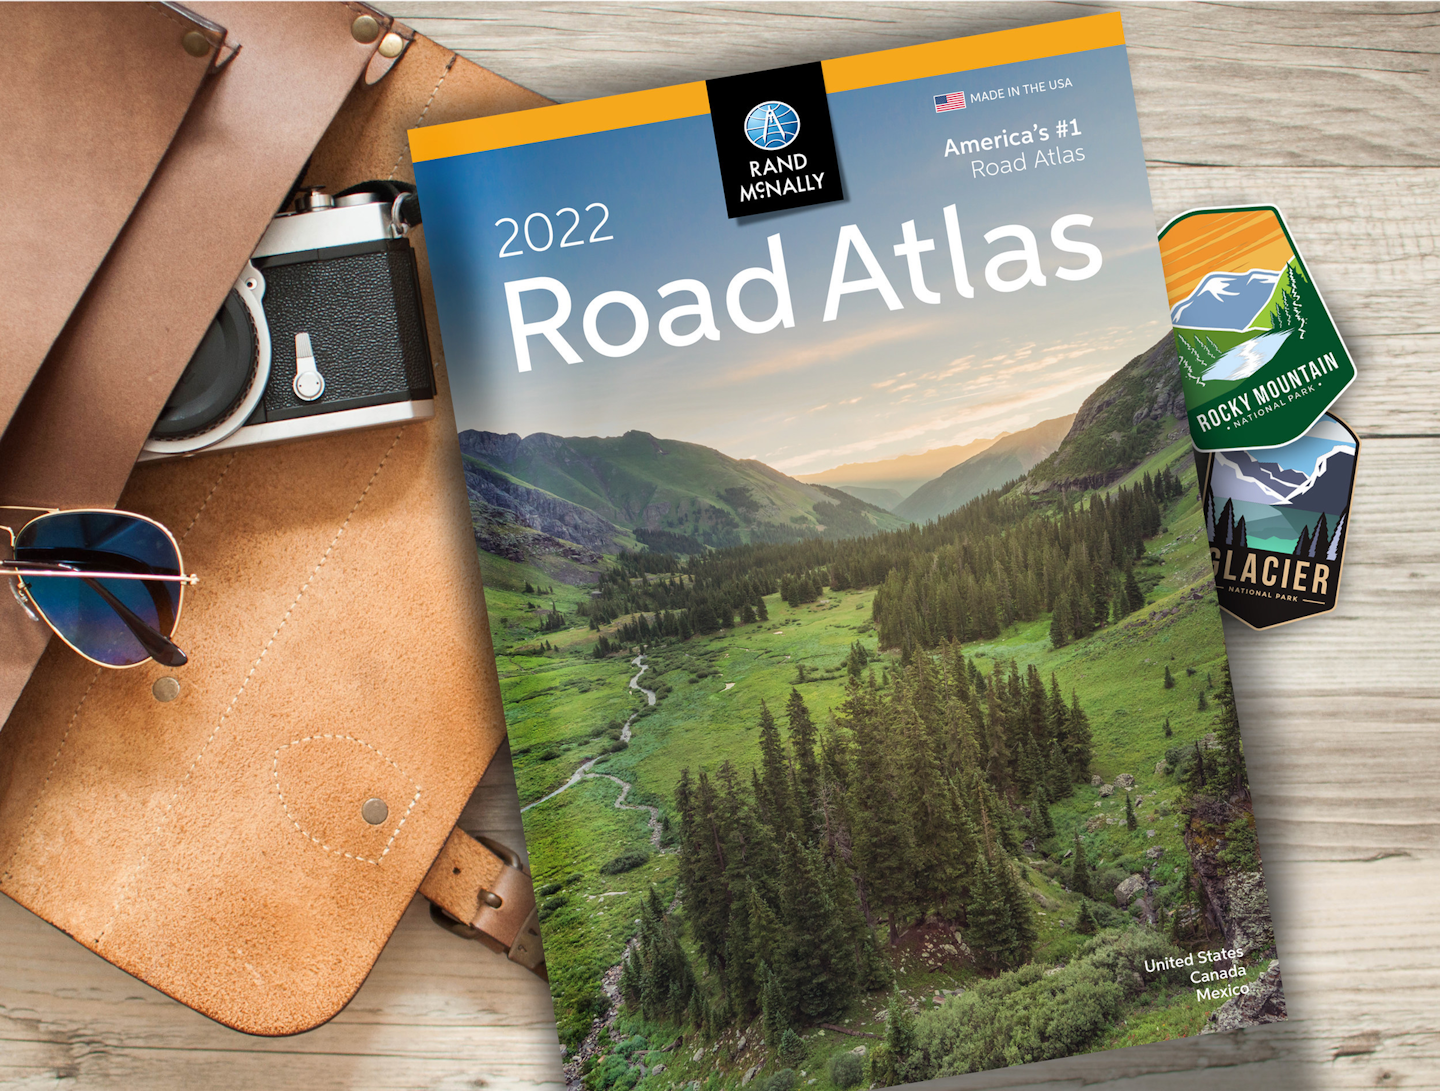 Rand McNally cartographers evaluate areas annually that may benefit from additional mapping.